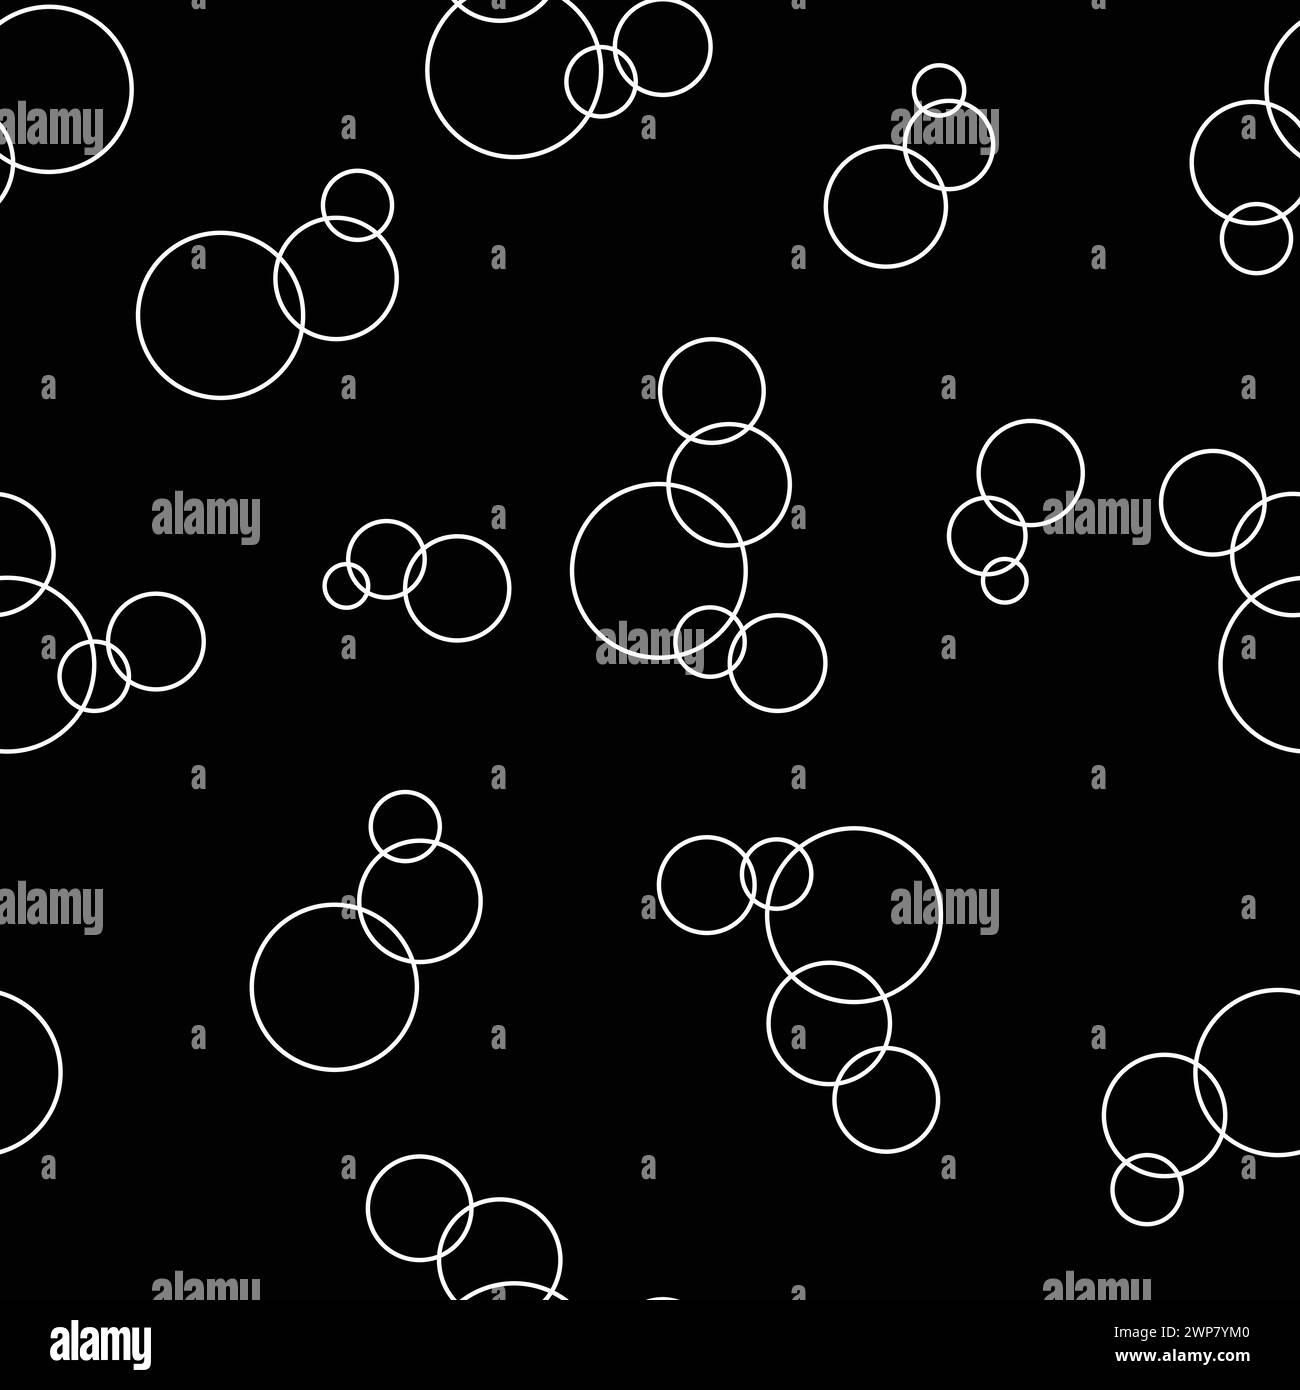 Repeating pattern with circle outline on a black background. Сhaotic circles seamless pattern. Endless printable pattern Stock Vector